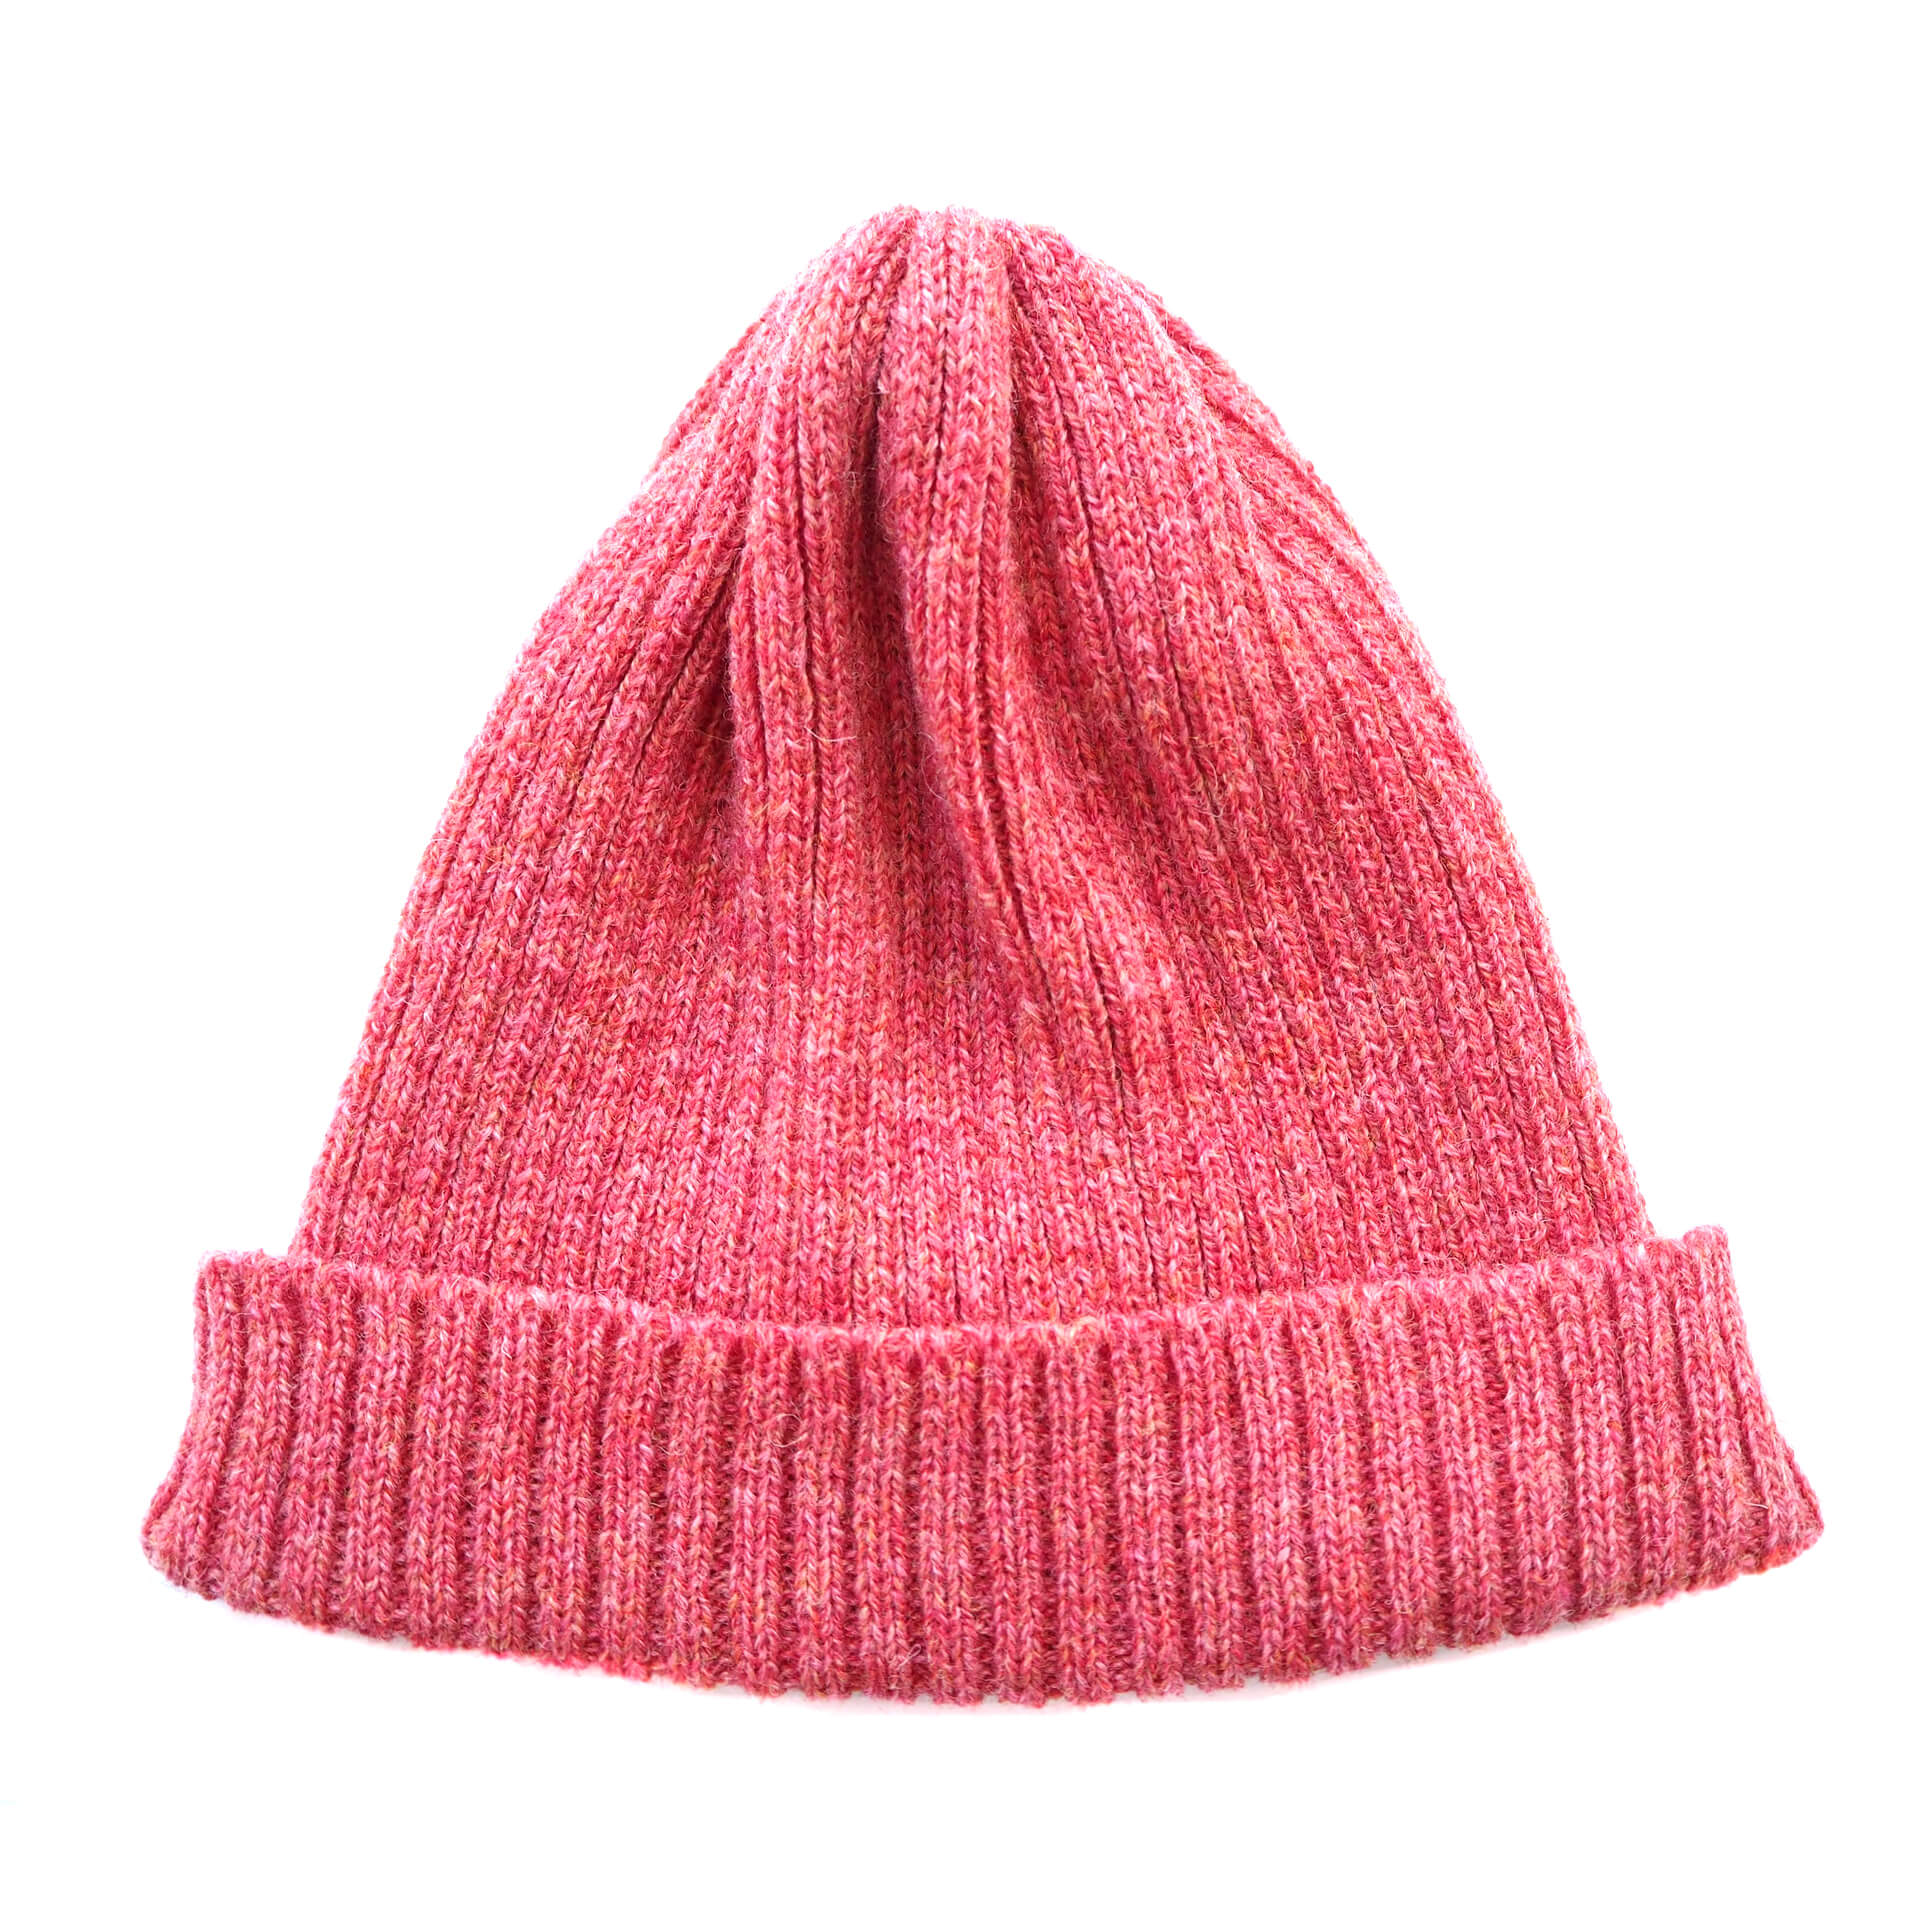 A pink ribbed beanie with a folded brim by K.Moods. It is on a white background.